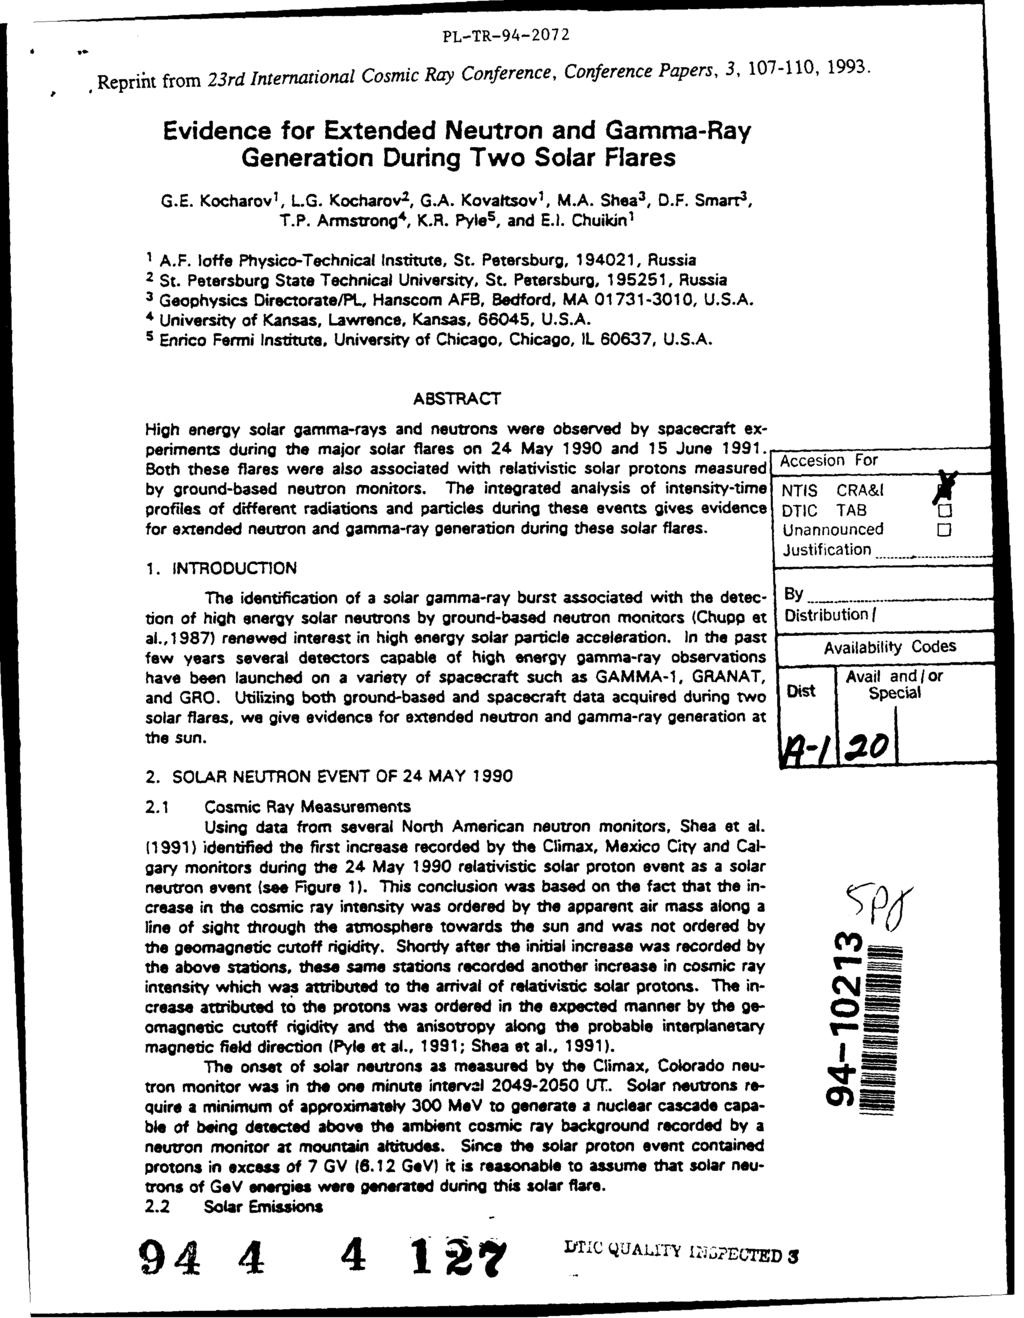 PL-TR-94-2072, Repriht from 23rd International Cosmic Ray Conference, Conference Papers, 3, 107-110, 1993. Evidence for Extended Neutron and Gamma-Ray Generation During Two Solar Flares G.E. Kocharov 1, L.